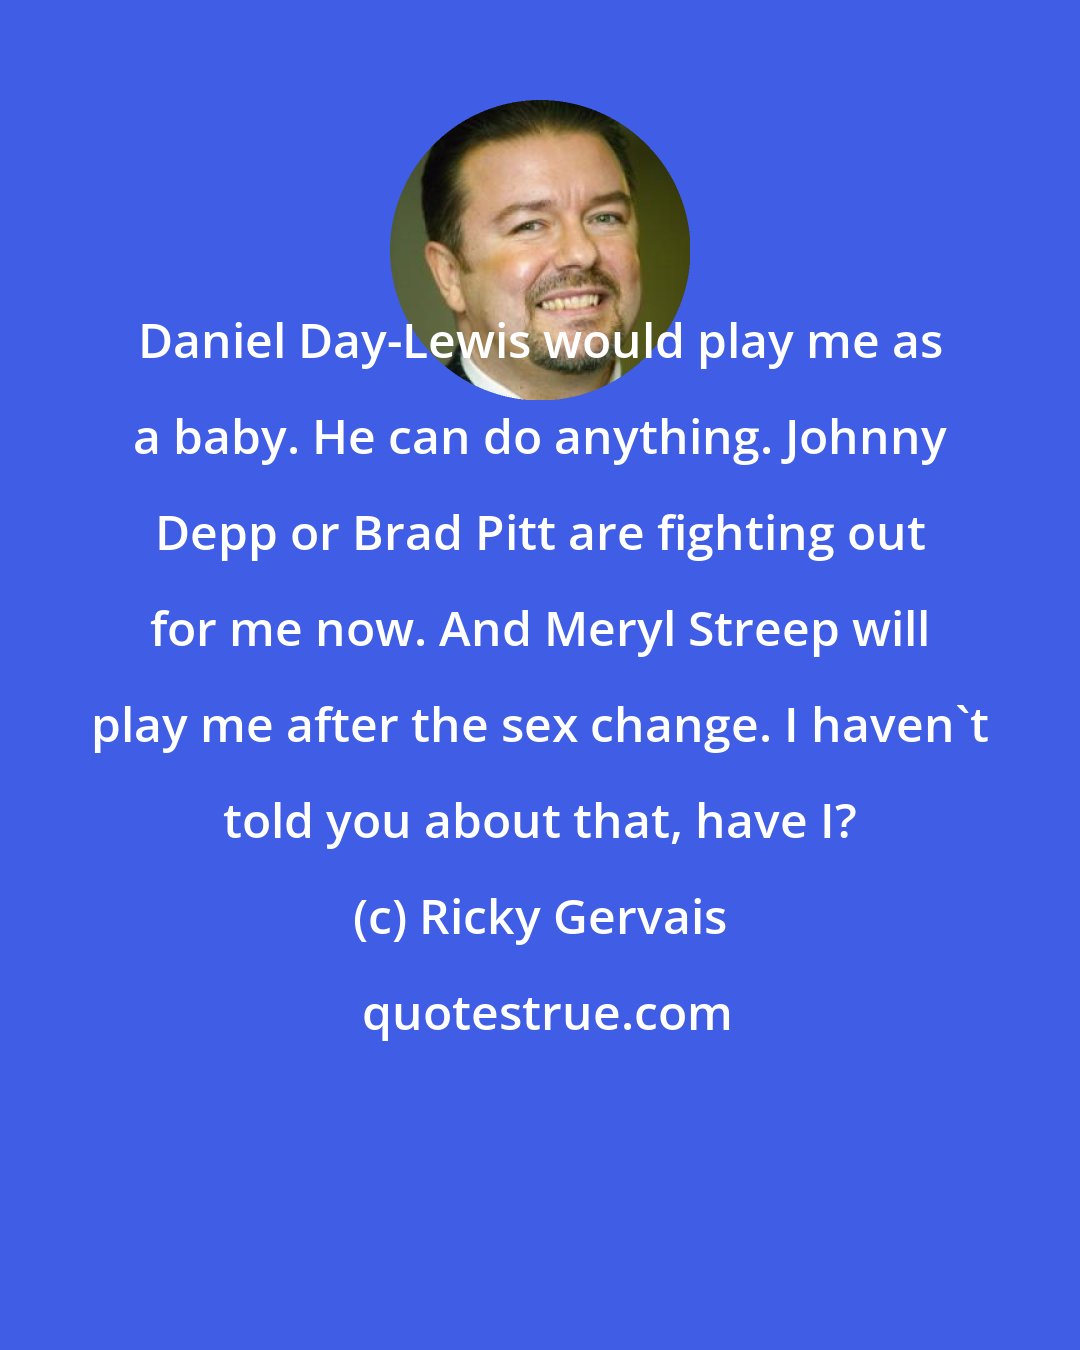 Ricky Gervais: Daniel Day-Lewis would play me as a baby. He can do anything. Johnny Depp or Brad Pitt are fighting out for me now. And Meryl Streep will play me after the sex change. I haven't told you about that, have I?